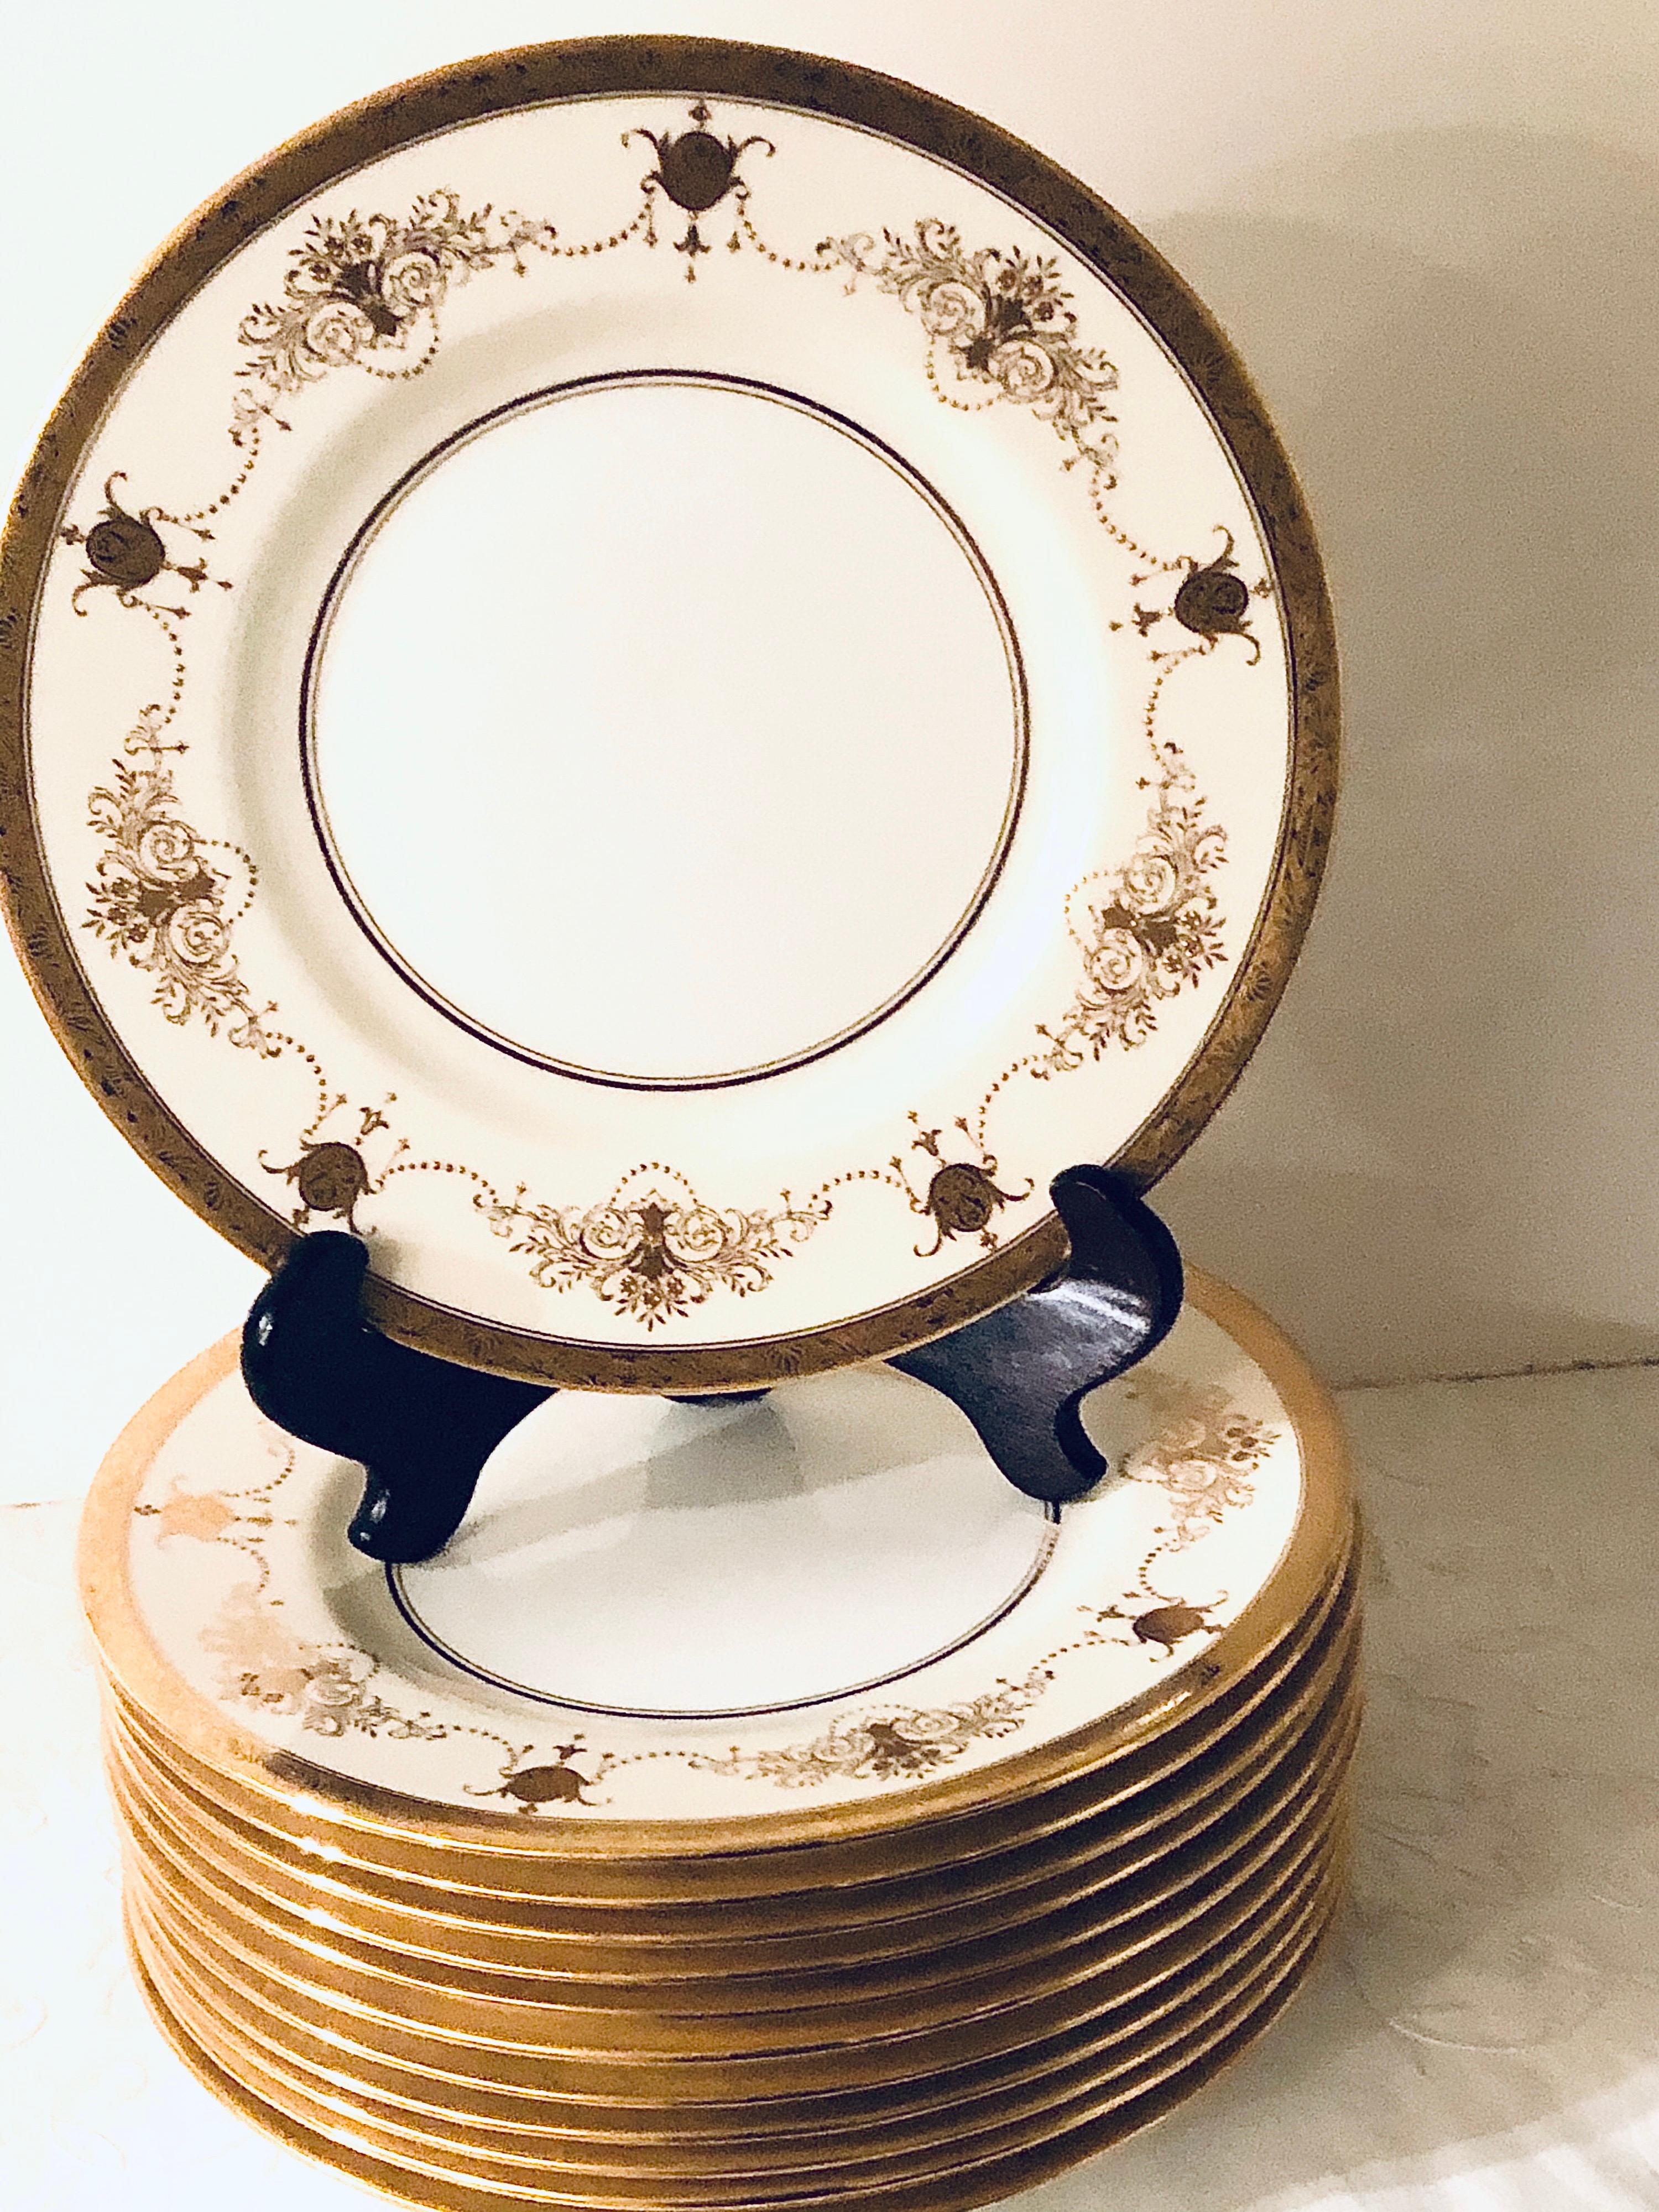 Gilt Set of 12 Minton Dinner Plates Decorated with Ribbons of Raised Gilded Jeweling For Sale